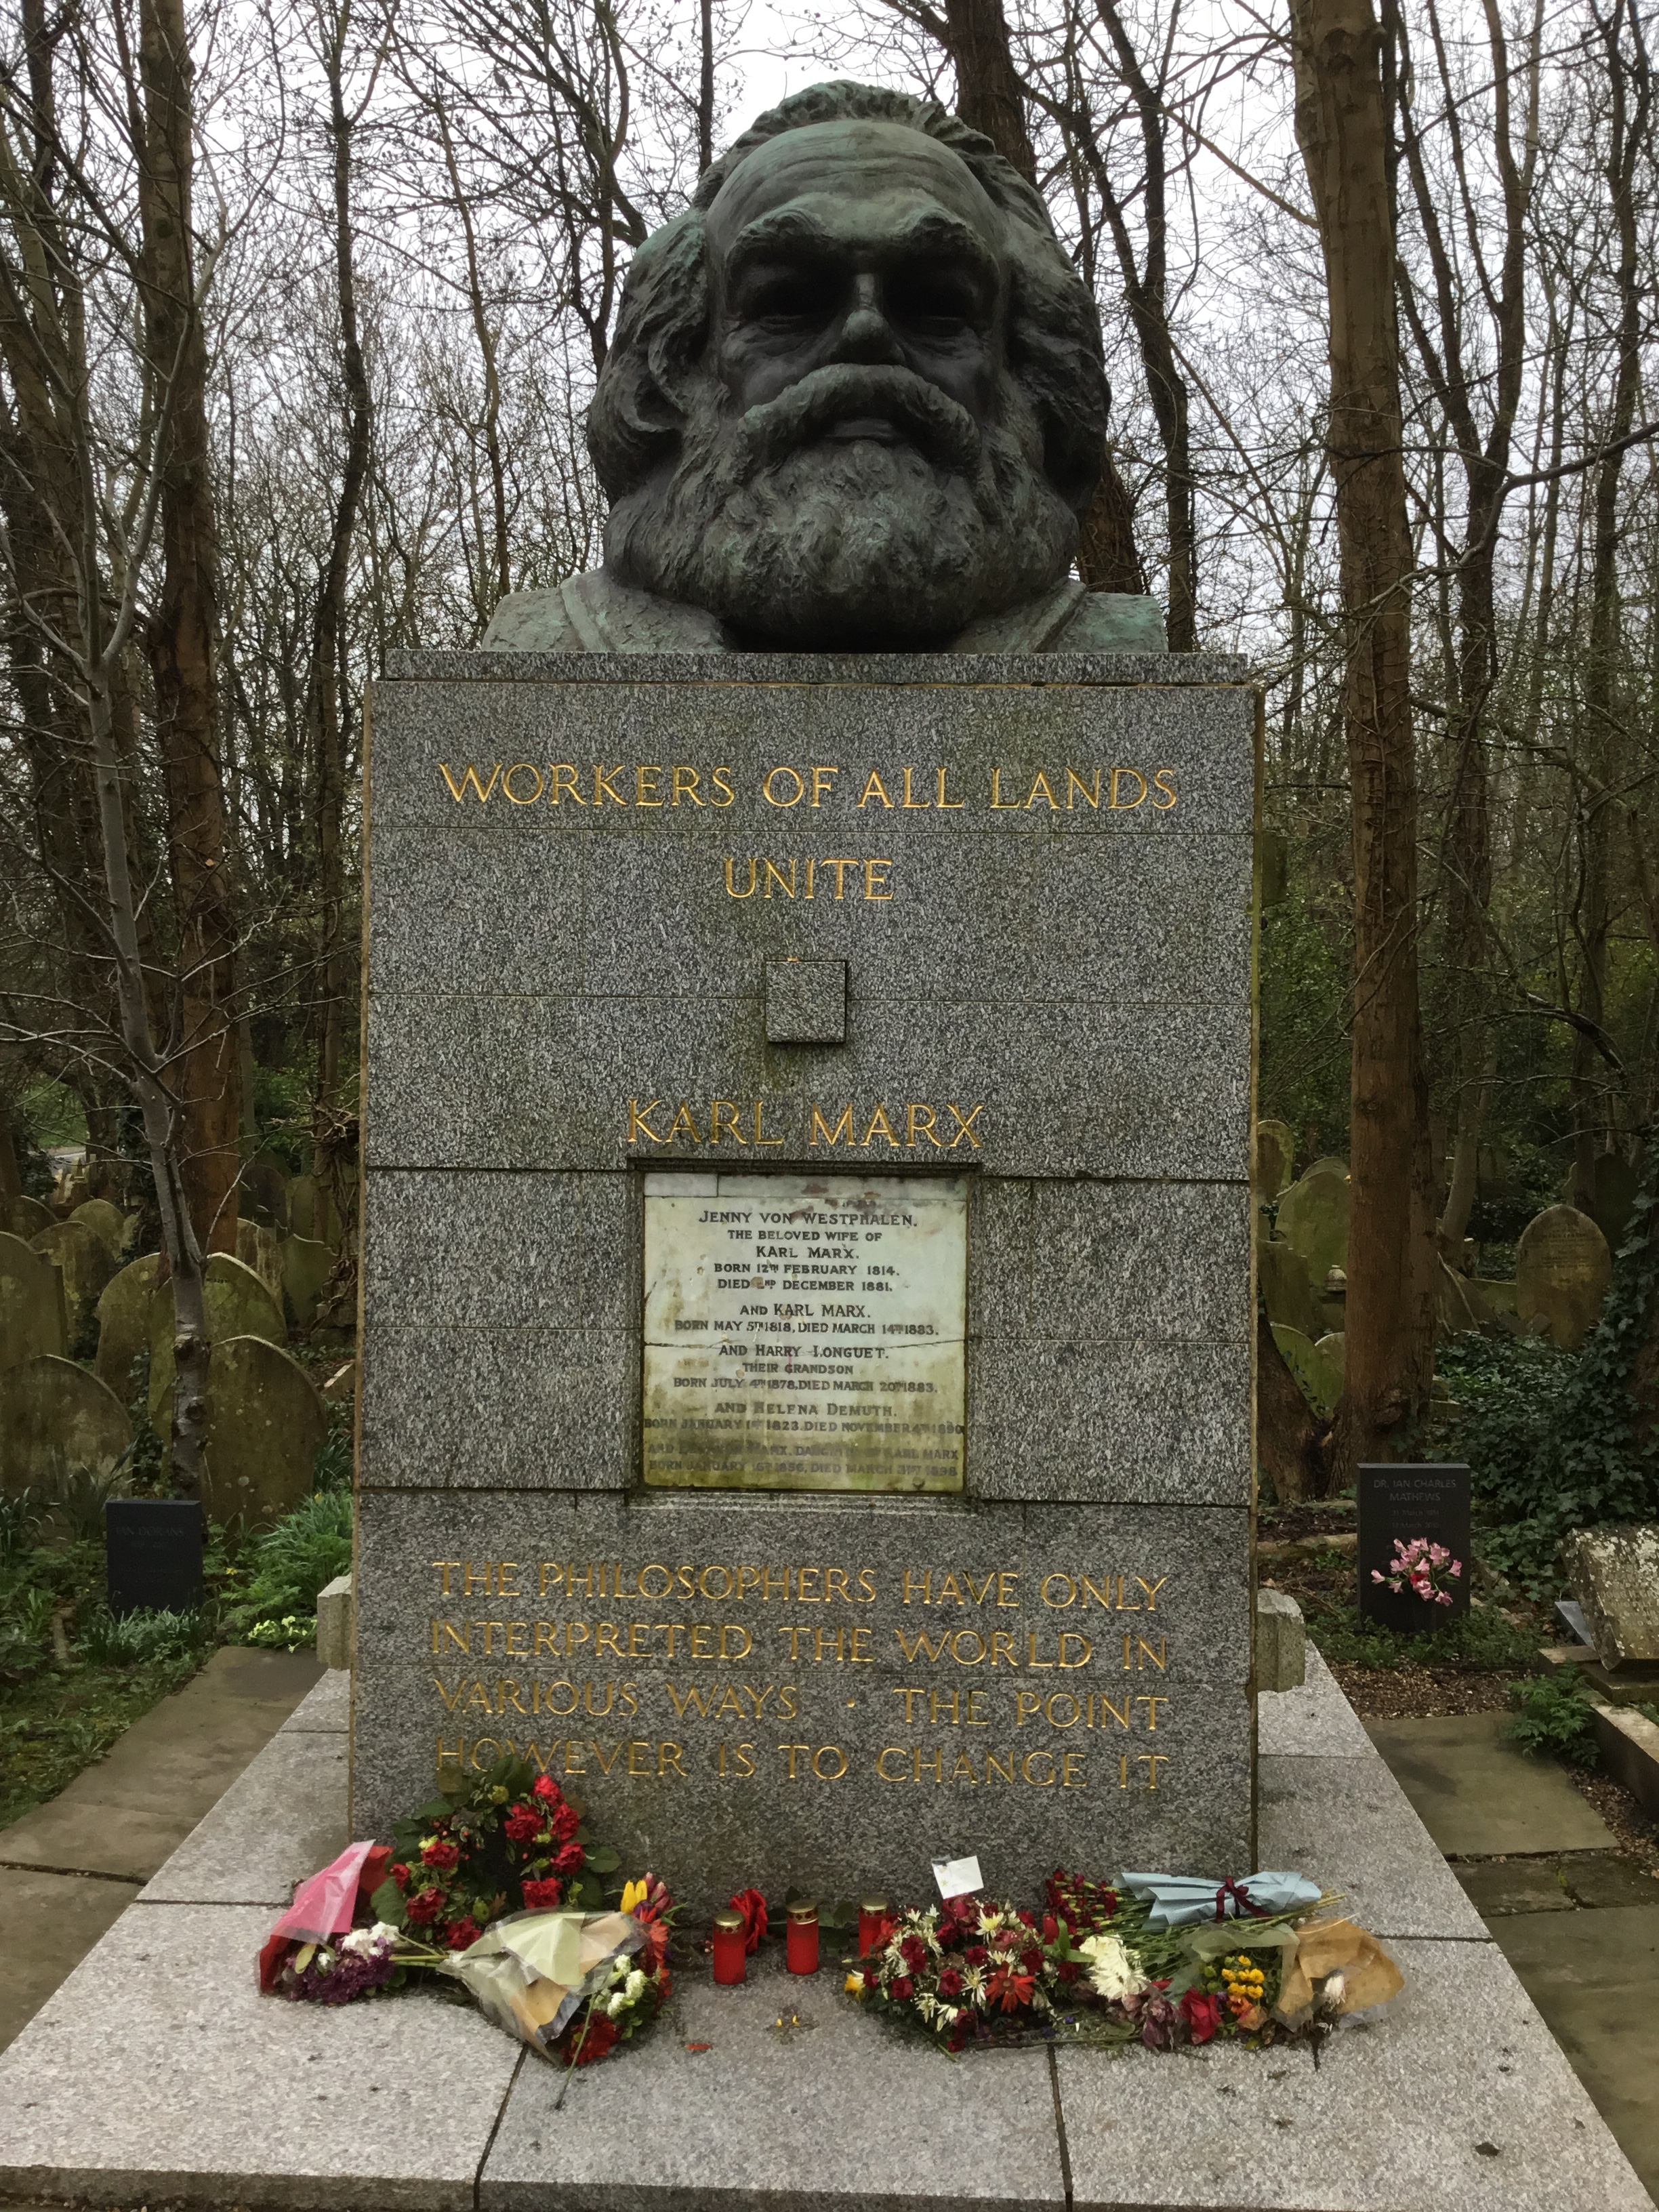 A photo of Marx’s grave. Since my father is in London right now, I asked him to return to Highgate Cemetery and take this photo. It’s by him: Rick Abel.